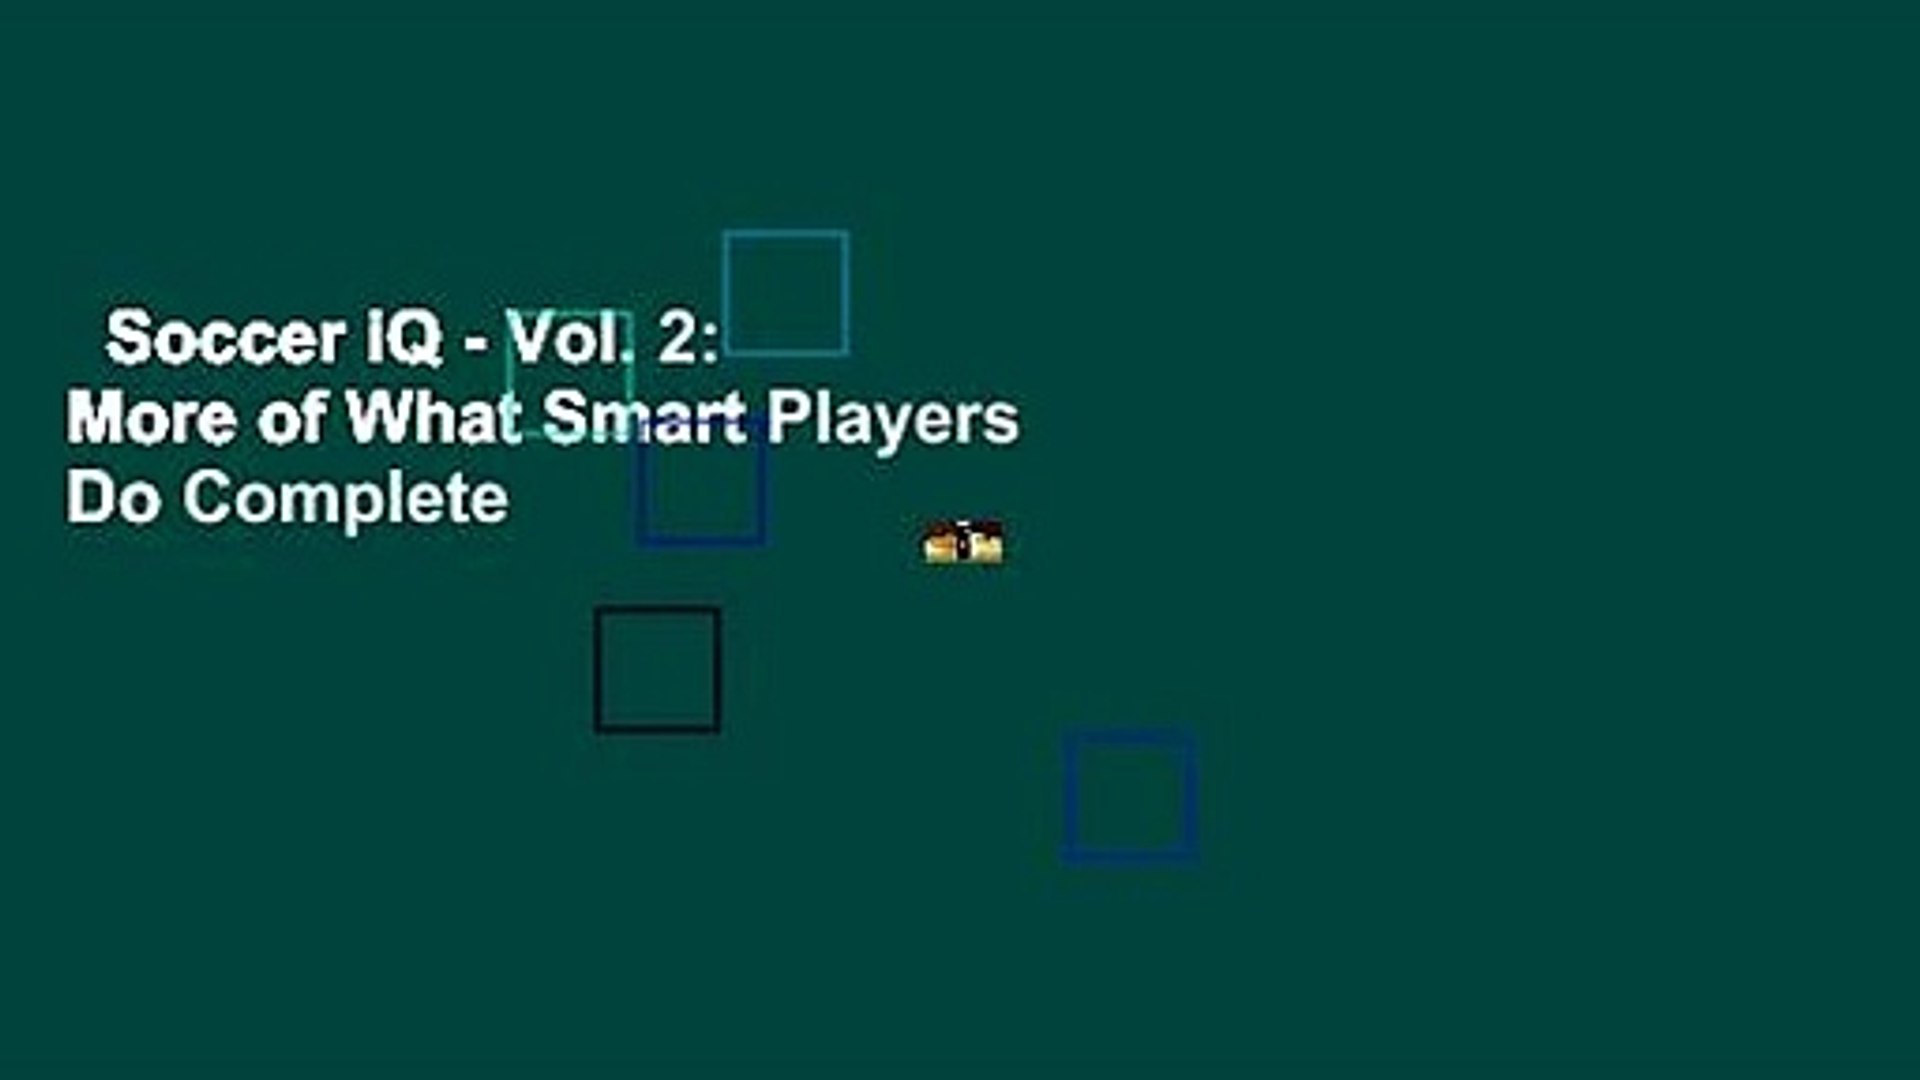 Soccer iQ - Vol. 2: More of What Smart Players Do Complete